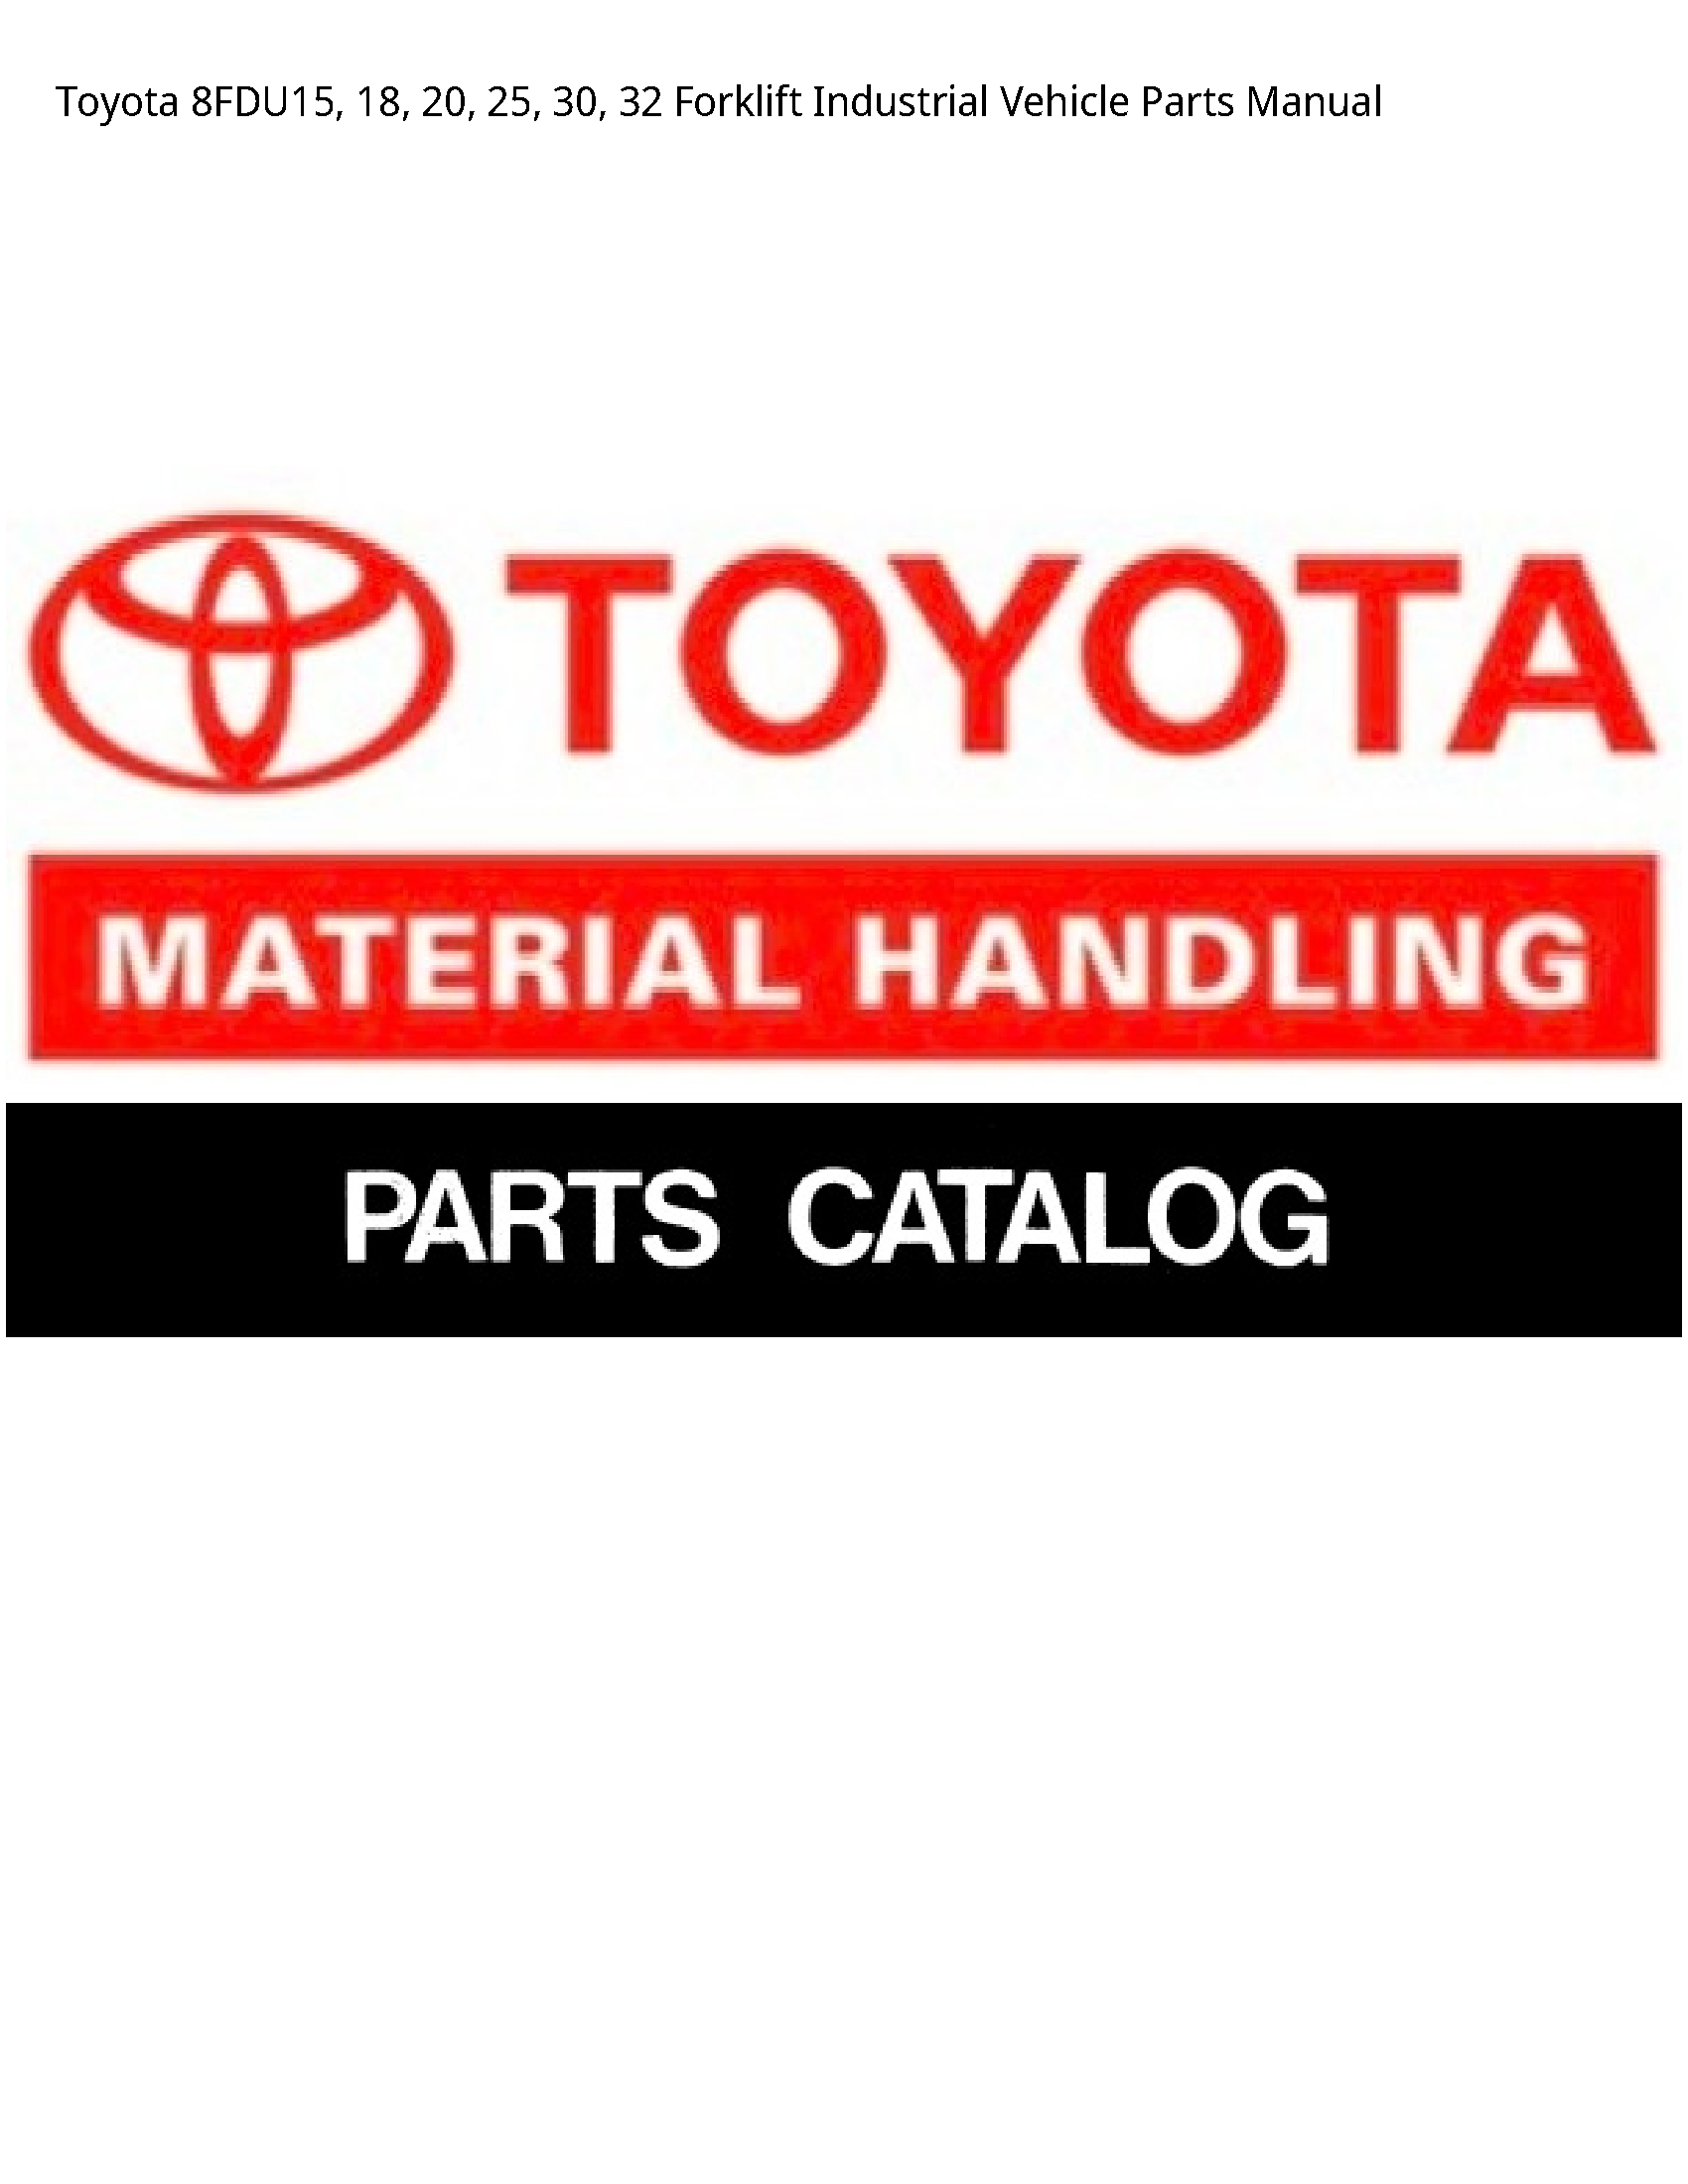 Toyota 8FDU15 Forklift Industrial Vehicle Parts manual